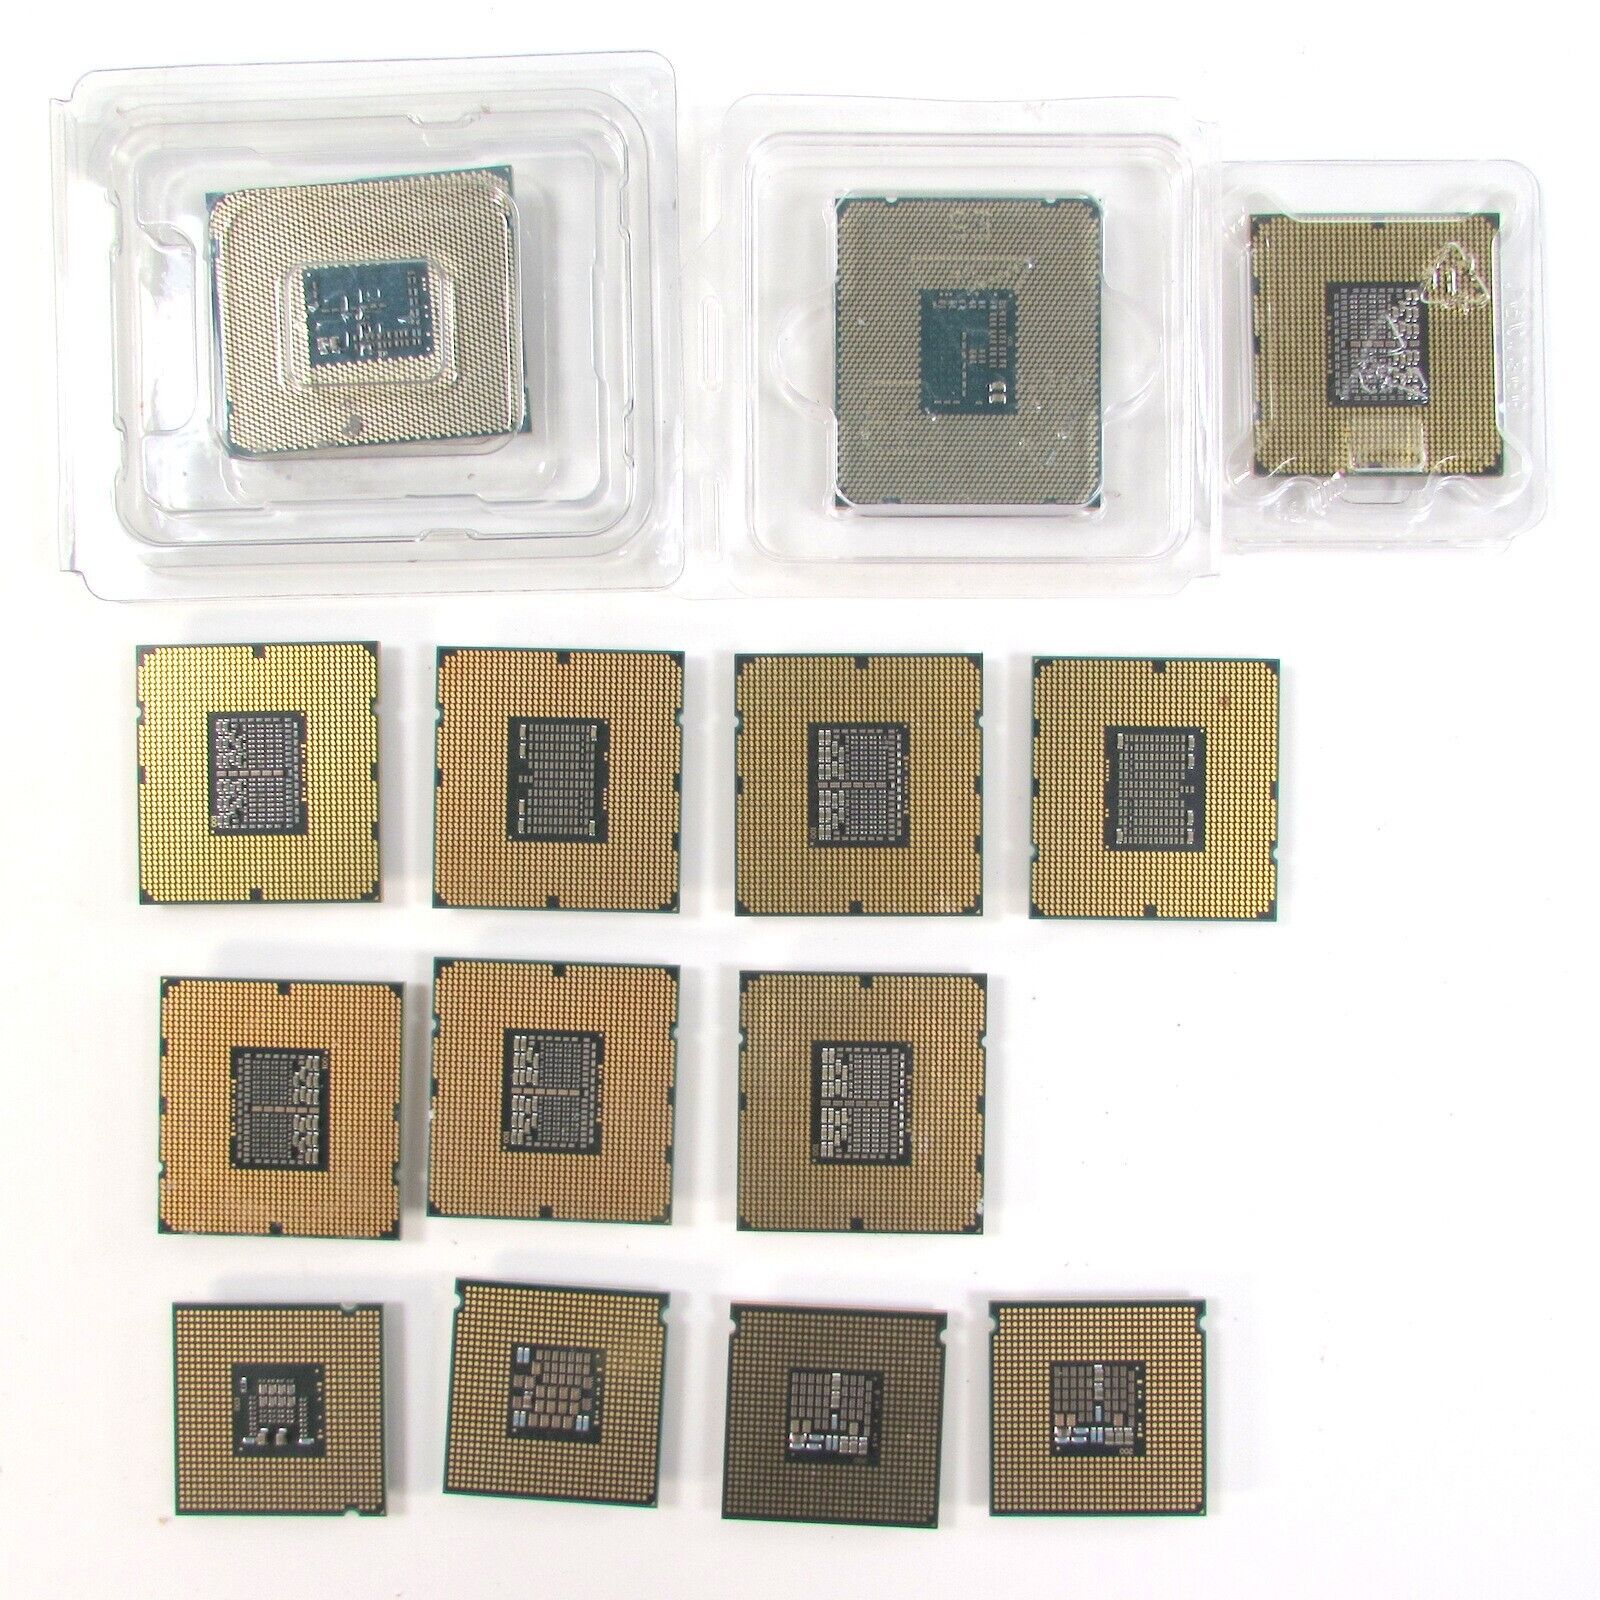 MIXED LOT of Intel Xeon Processors USED Unknown Condition 